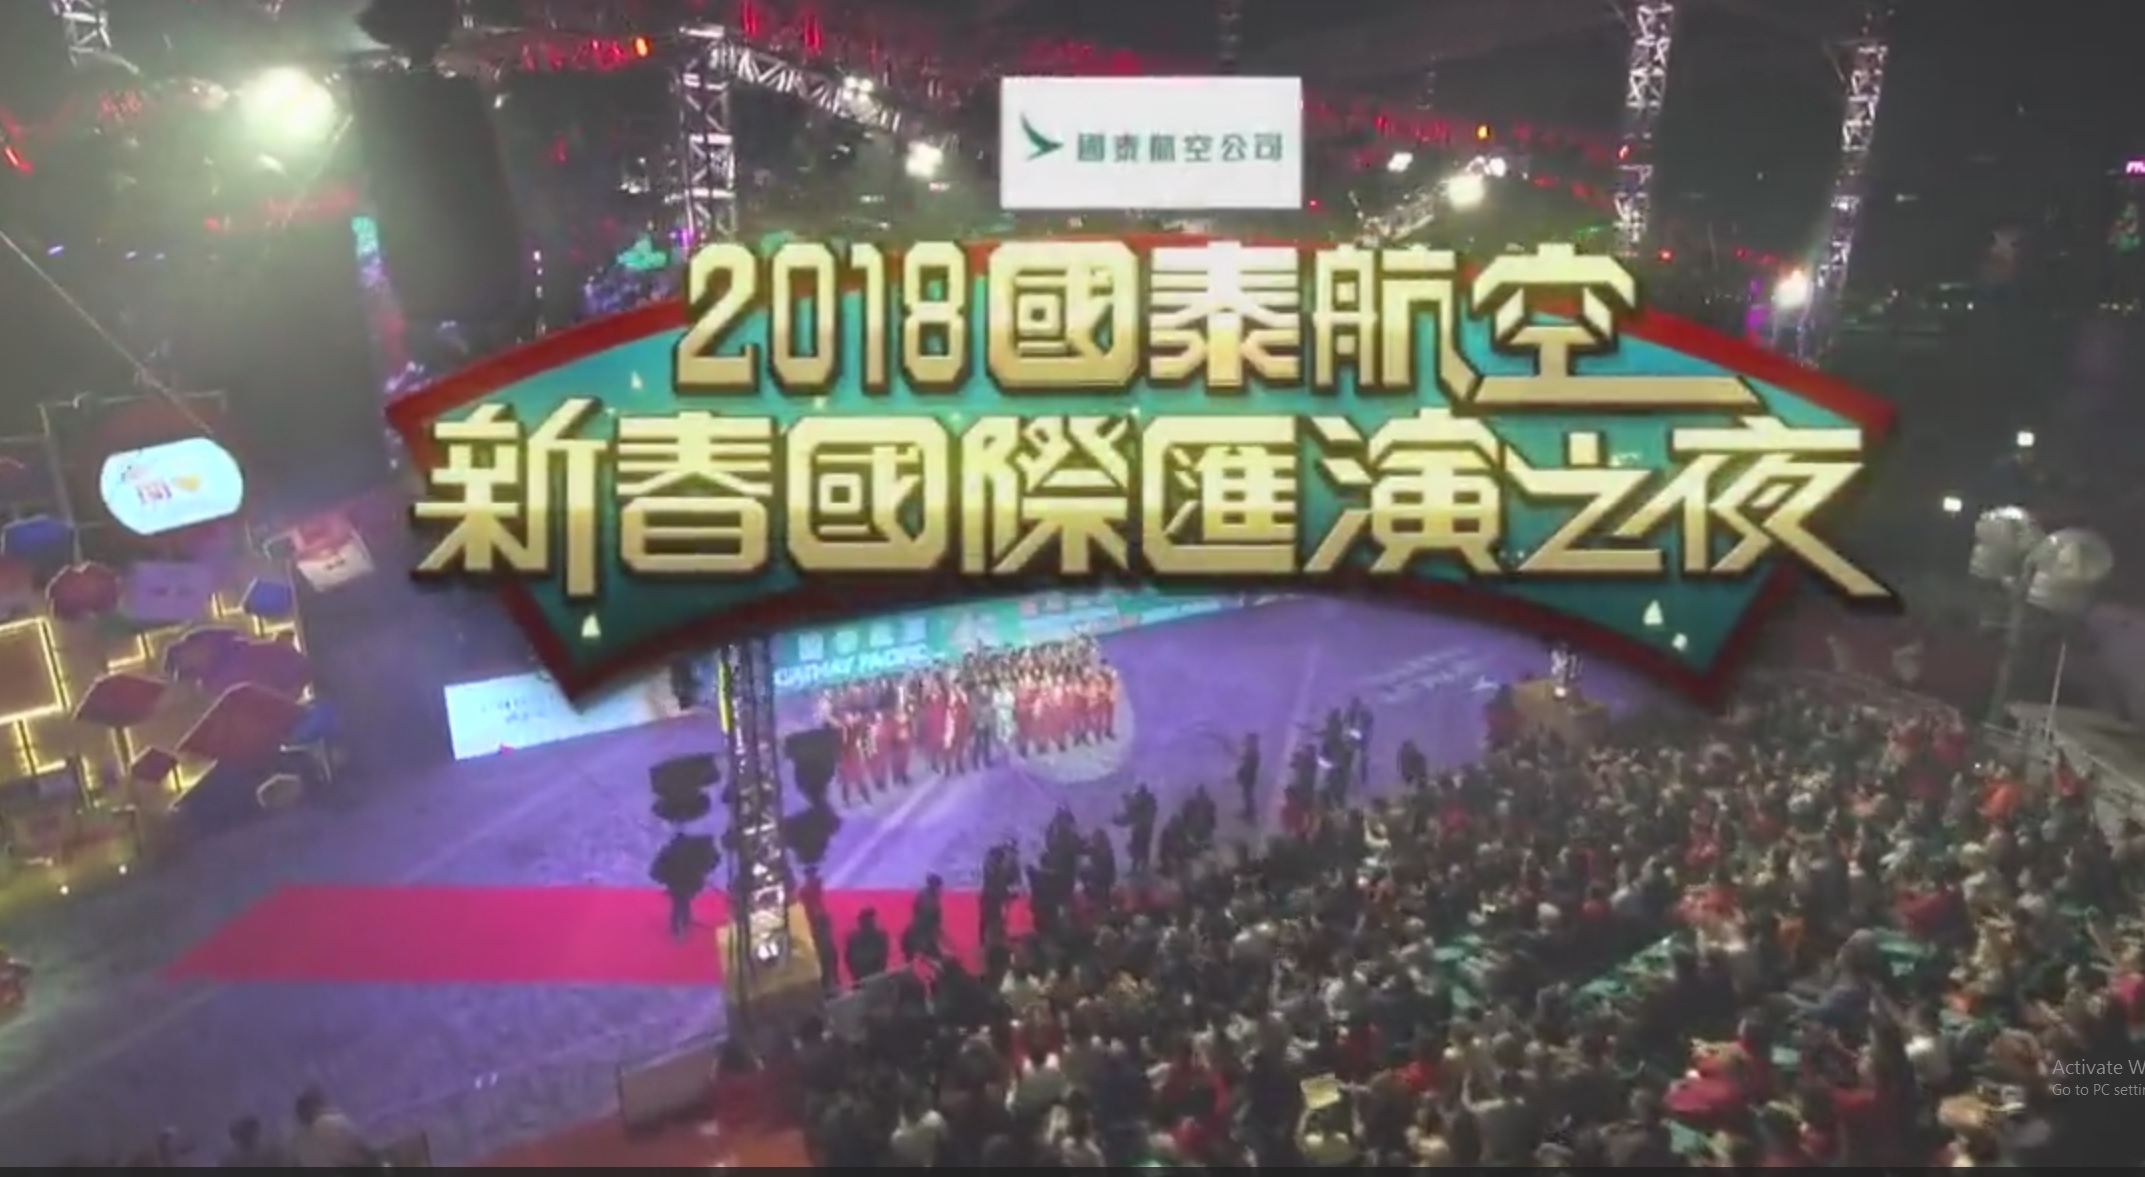 Cathay Pacific Chinese New Year Night Parade 2018 - 2018國泰航空新春國際匯演之夜